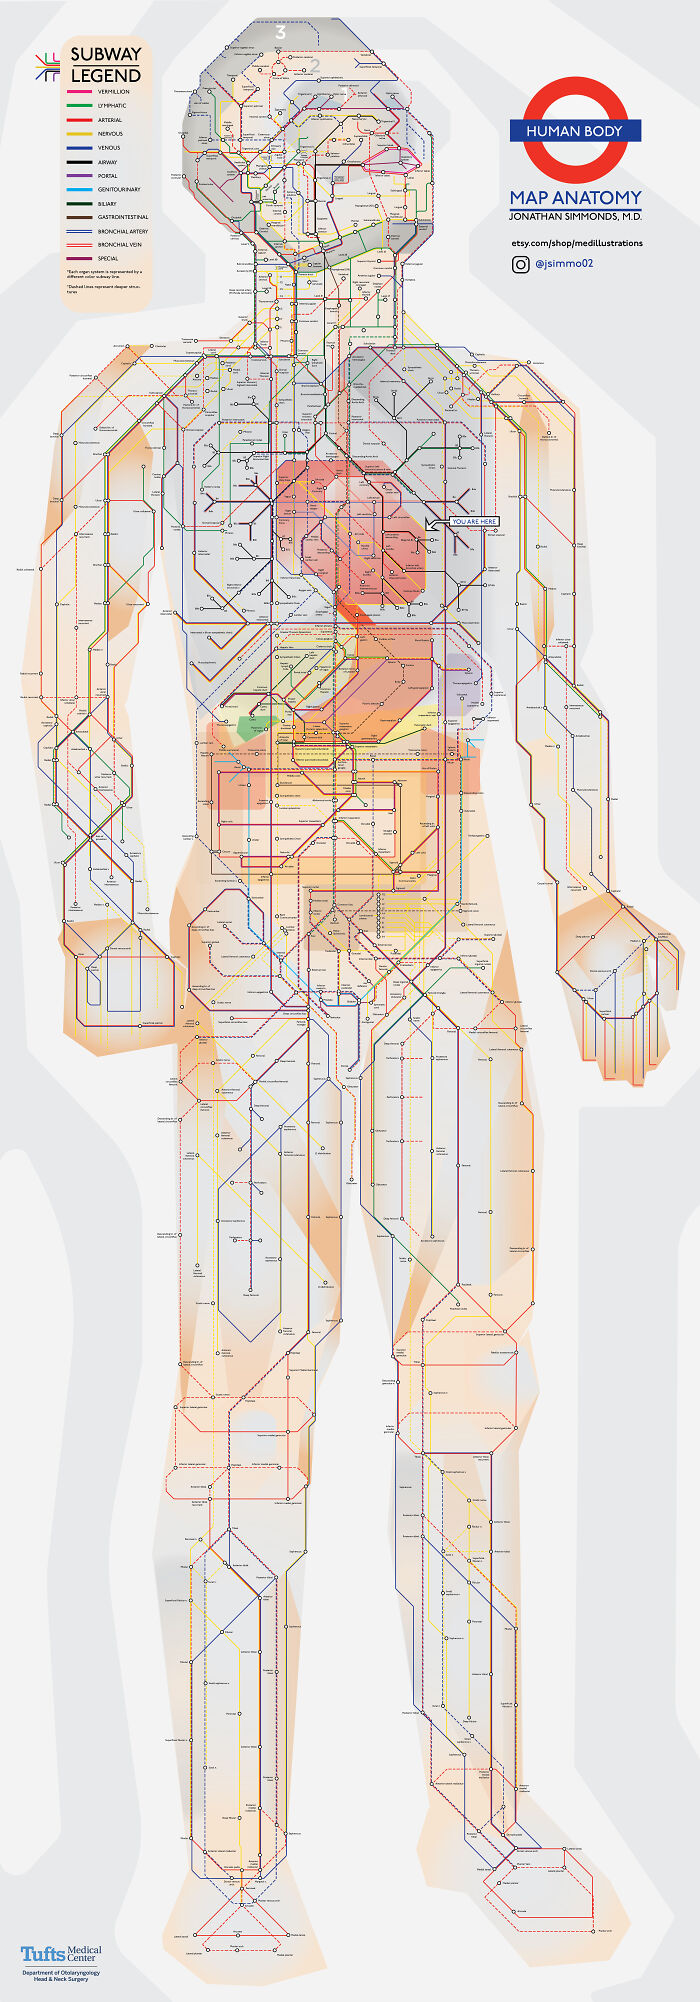 Anatomy Of The Human Body, In The Style Of The London Underground Map